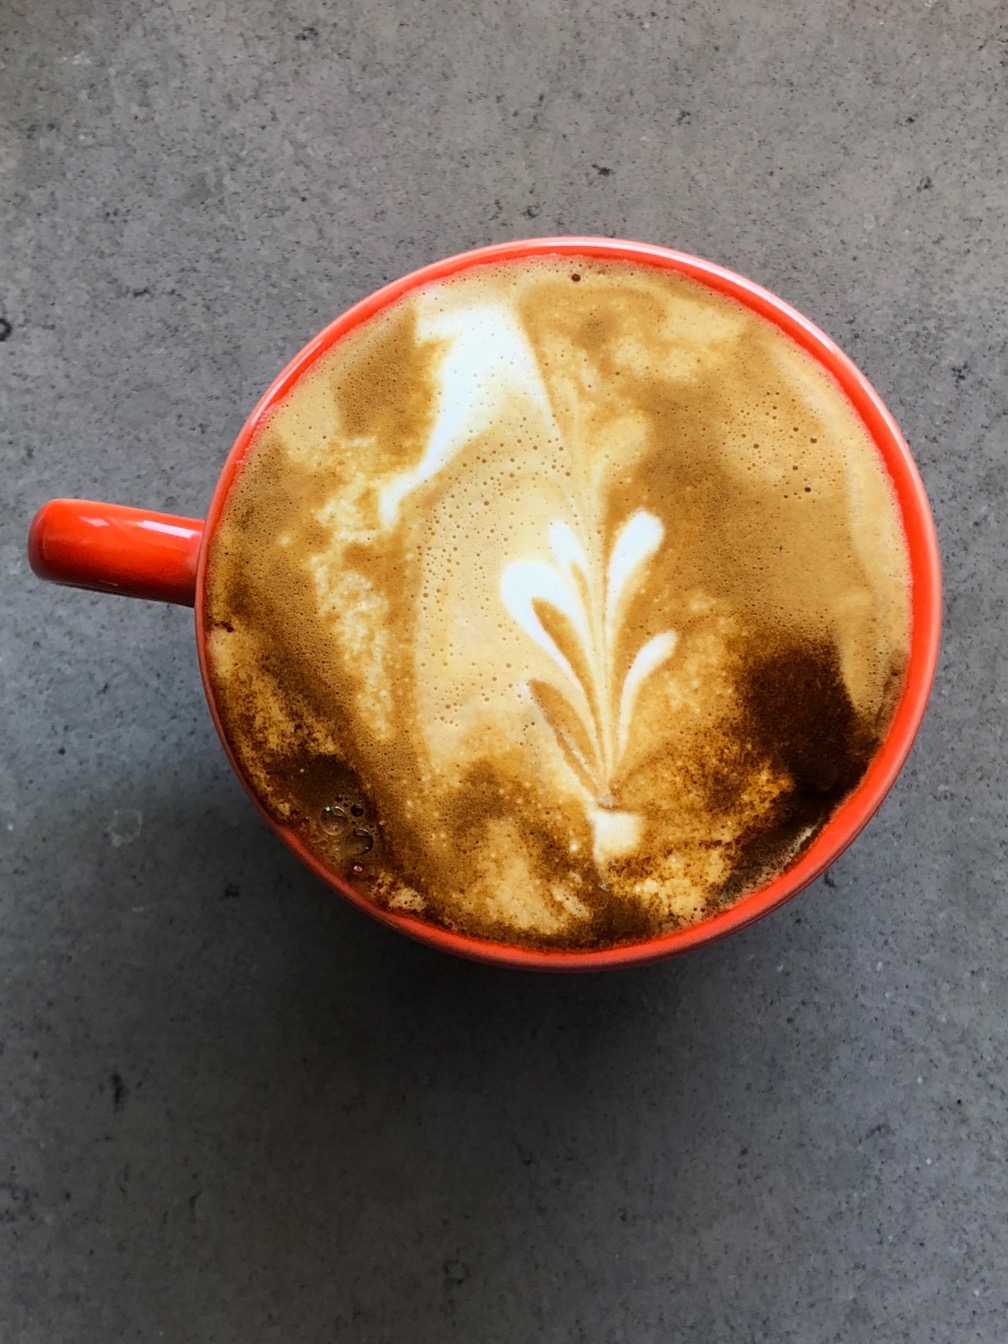 Cappuccino in an orange cup on a speckled gray counter.  